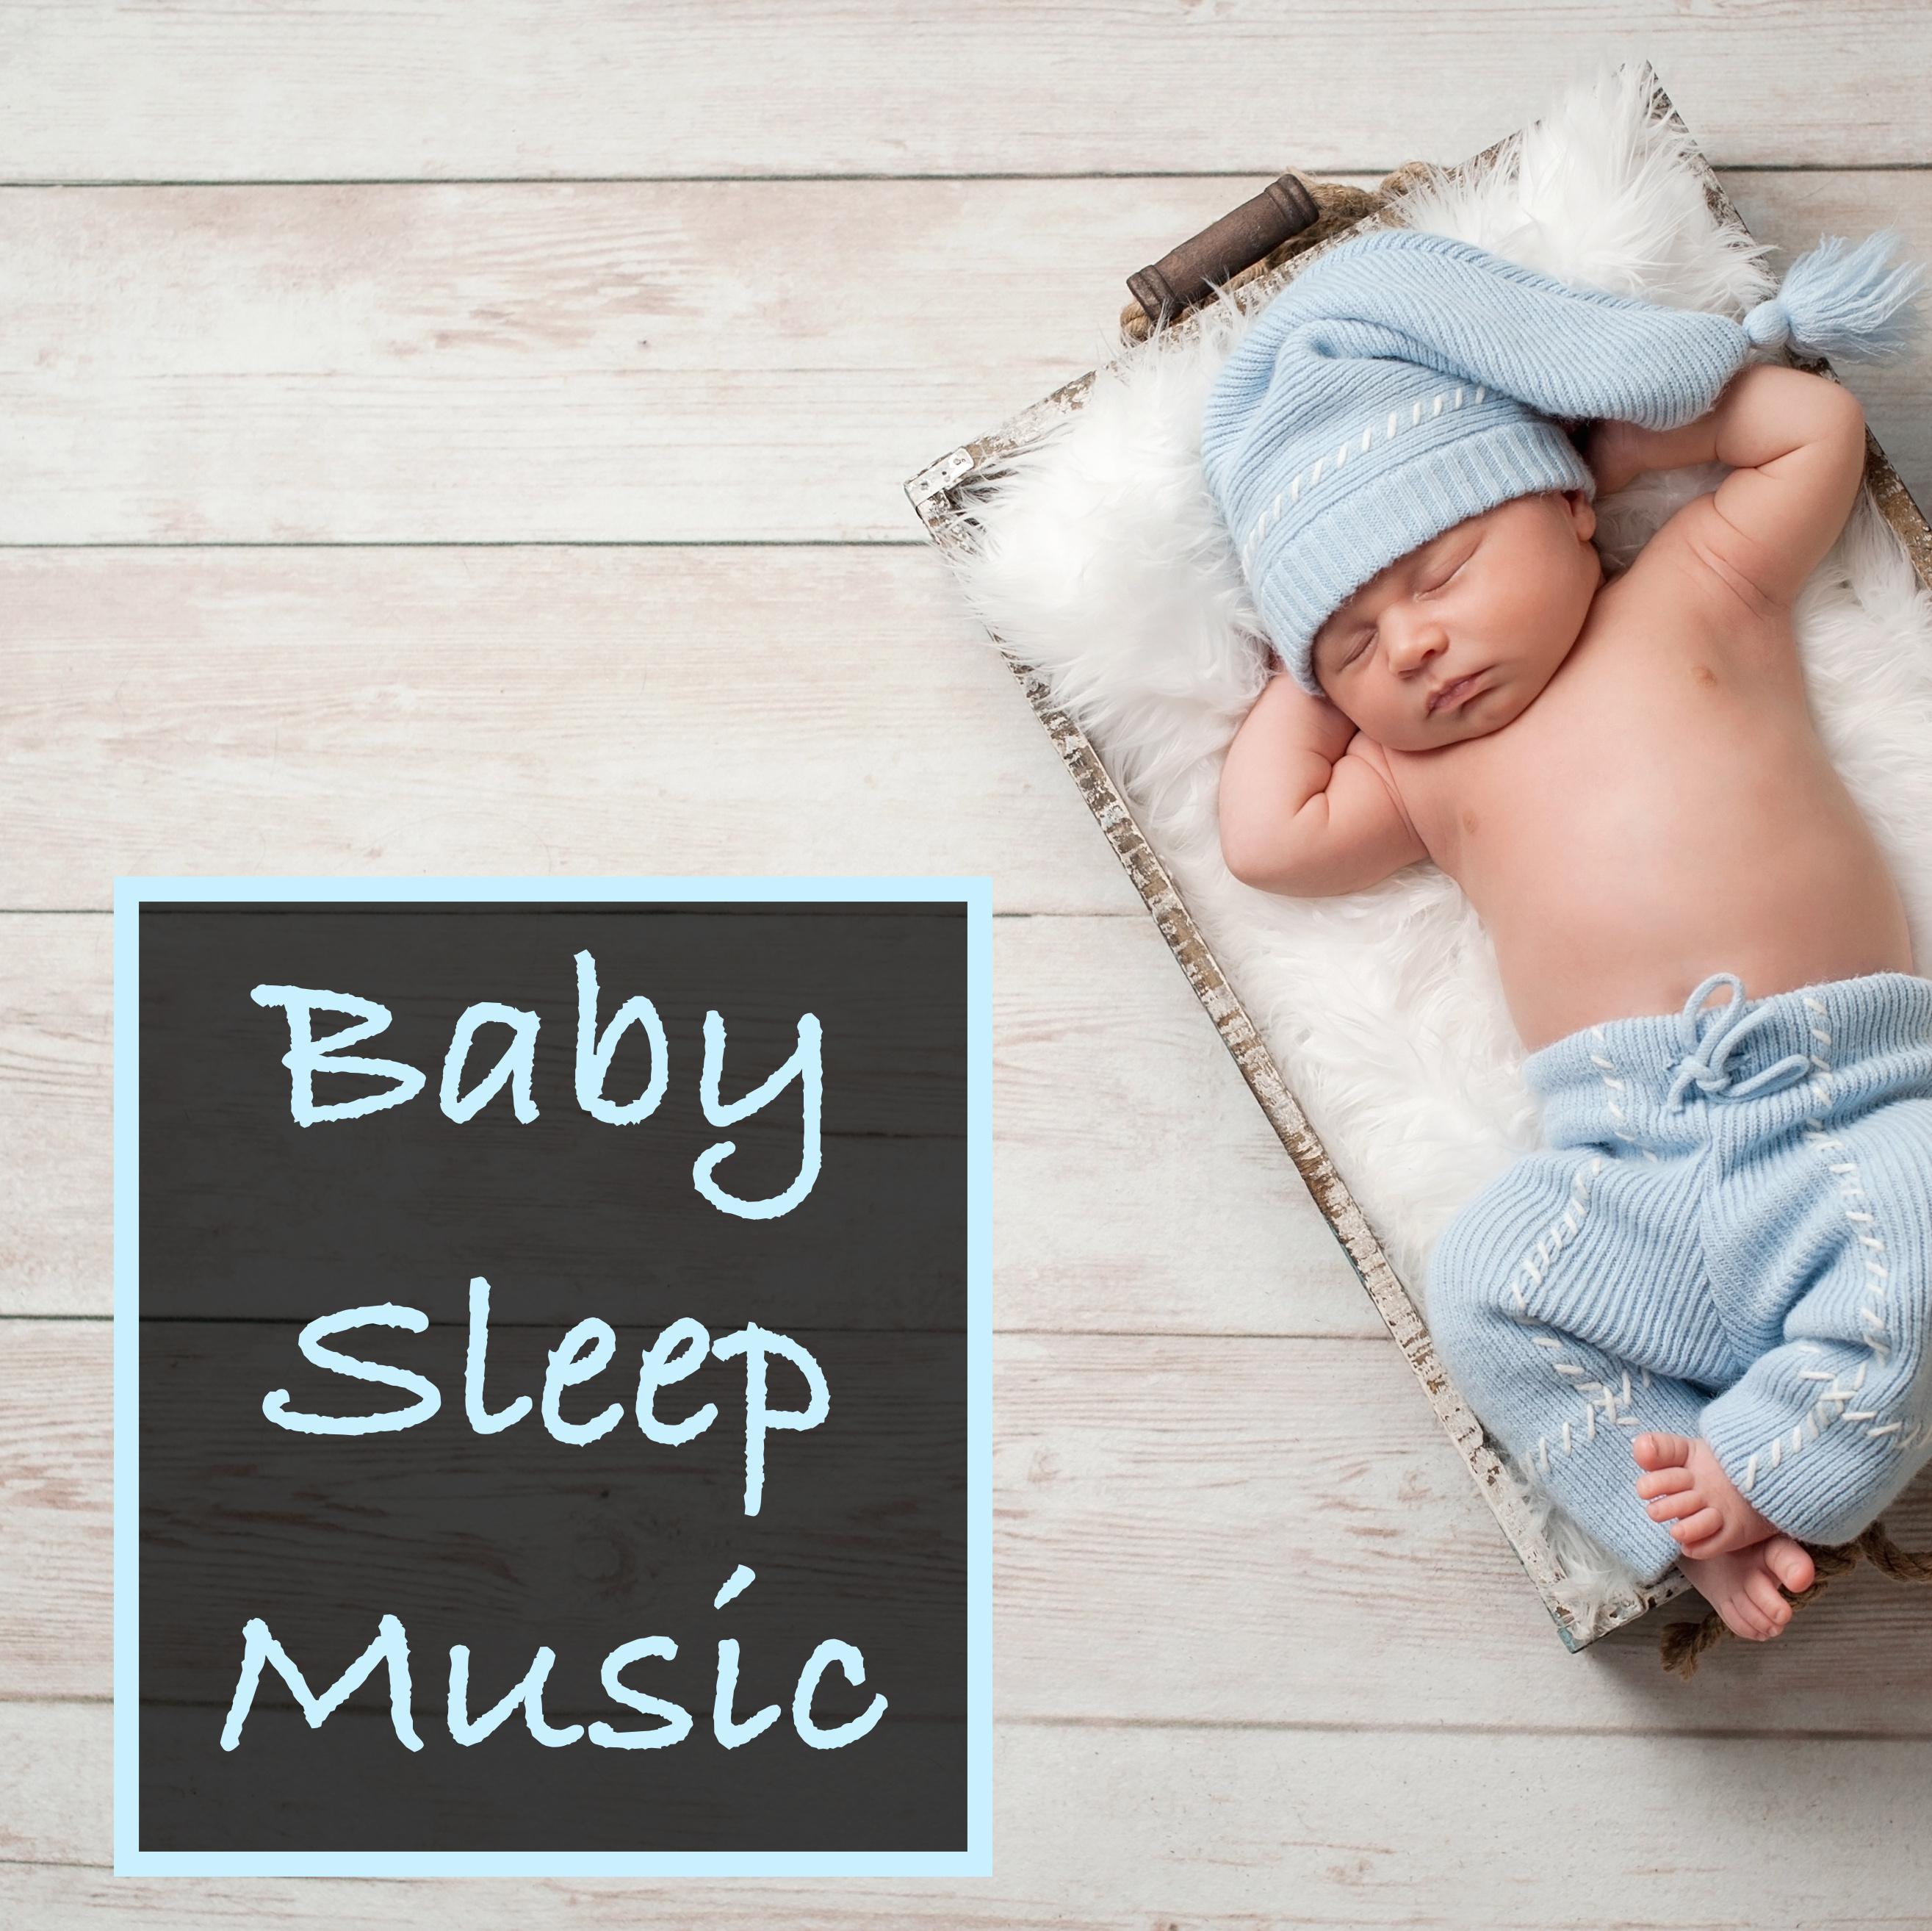 Baby Sleep Music - 20 Peaceful and Relaxing Rain & Water Lullabies for a Blissful, Quiet Night of Sleep and for Healthy & Natural Stress-Free Living